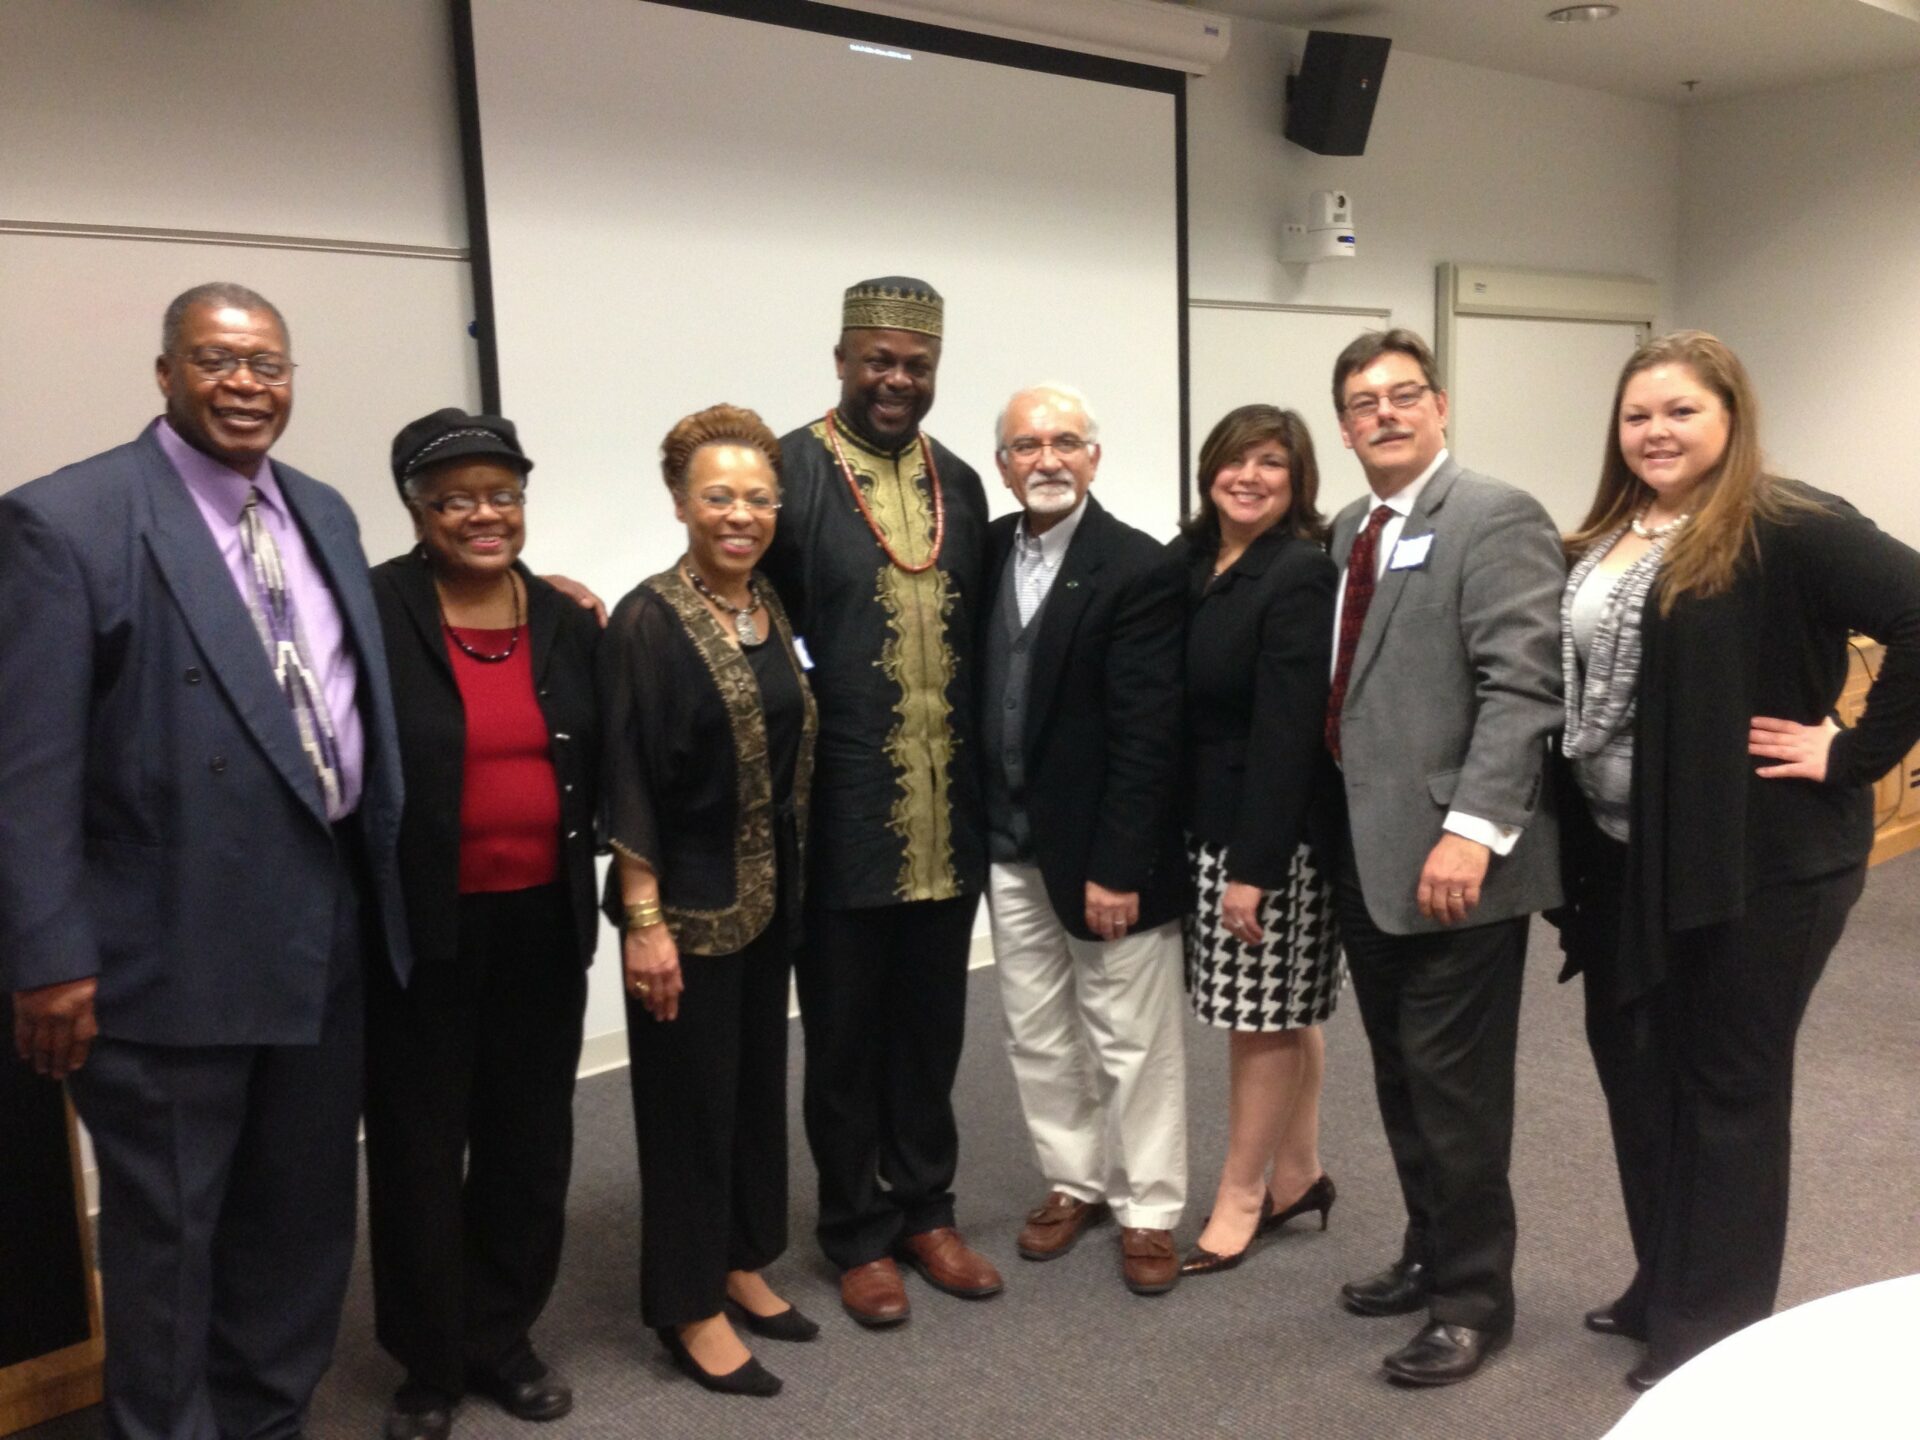 Board members and staff of the World Affairs Council of Harrisburg with Ambassador Ibiyinka Olufeme Alao, Nigeria's Honorary Arts Ambassador to the United Nations, at the 2014 International Poetry and Storytelling Festival held at Temple University Harrisburg. What a fantastic artist and storyteller!